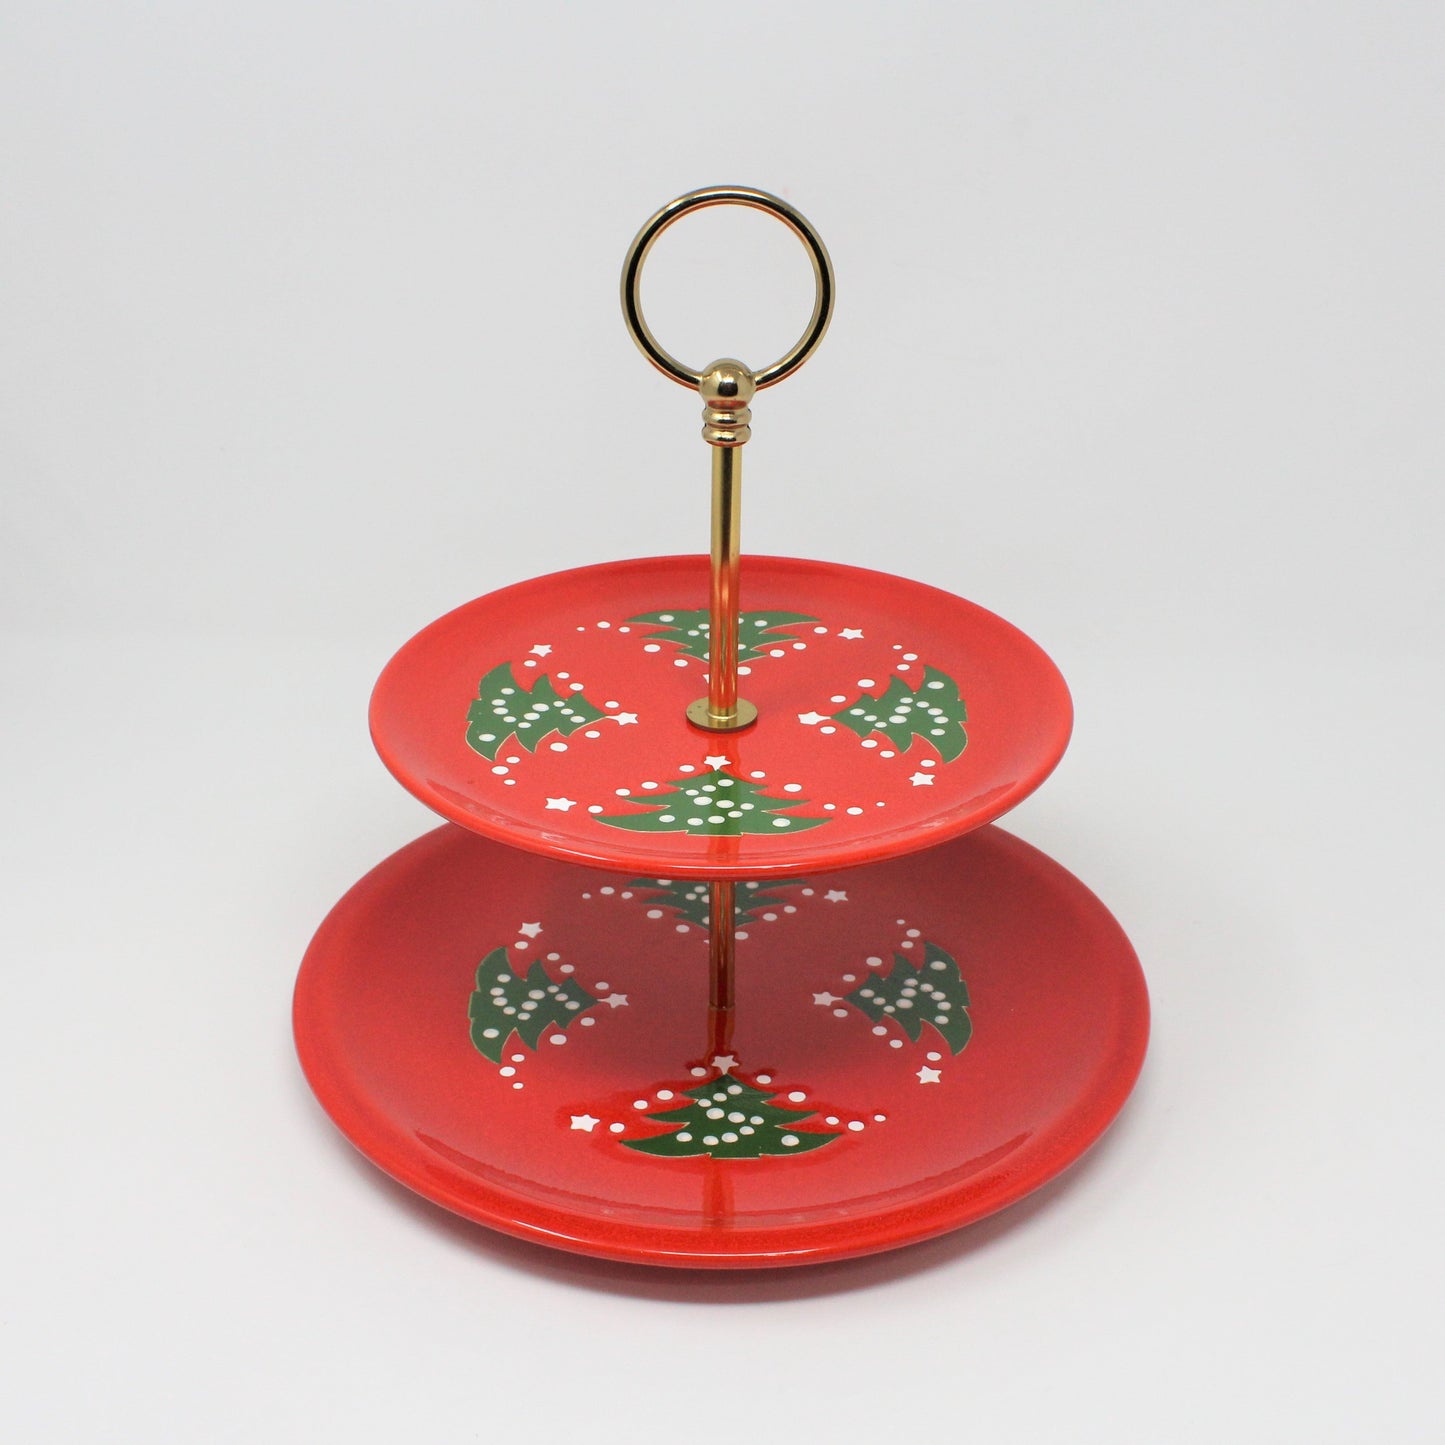 1980's Two Tier Serving Tray by Waechtersbach.  Red with Green Christmas Trees and Gold Tone Metal Handle